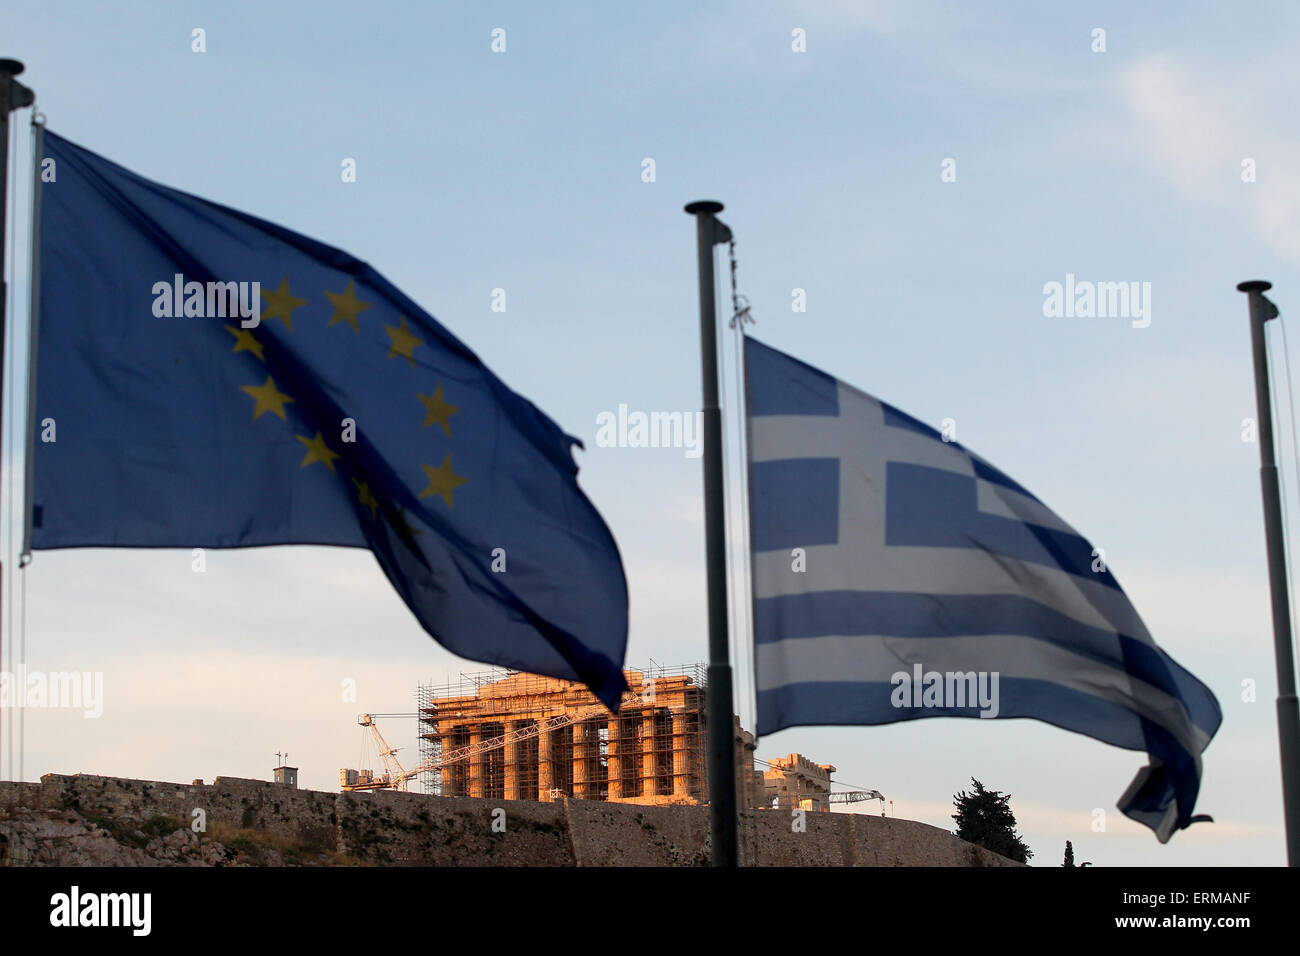 Athens, Greece. 4th June, 2015. Greek and European Union flags fly while the sun sets over the Acropolis, in Athens, Greece, on June 4, 2015. The Greek government on Thursday expressed optimism over a 'mutually acceptable' deal with international creditors on the country's debt repayment arrangements following the latest inconclusive talks in Brussels. © Marios Lolos/Xinhua/Alamy Live News Stock Photo